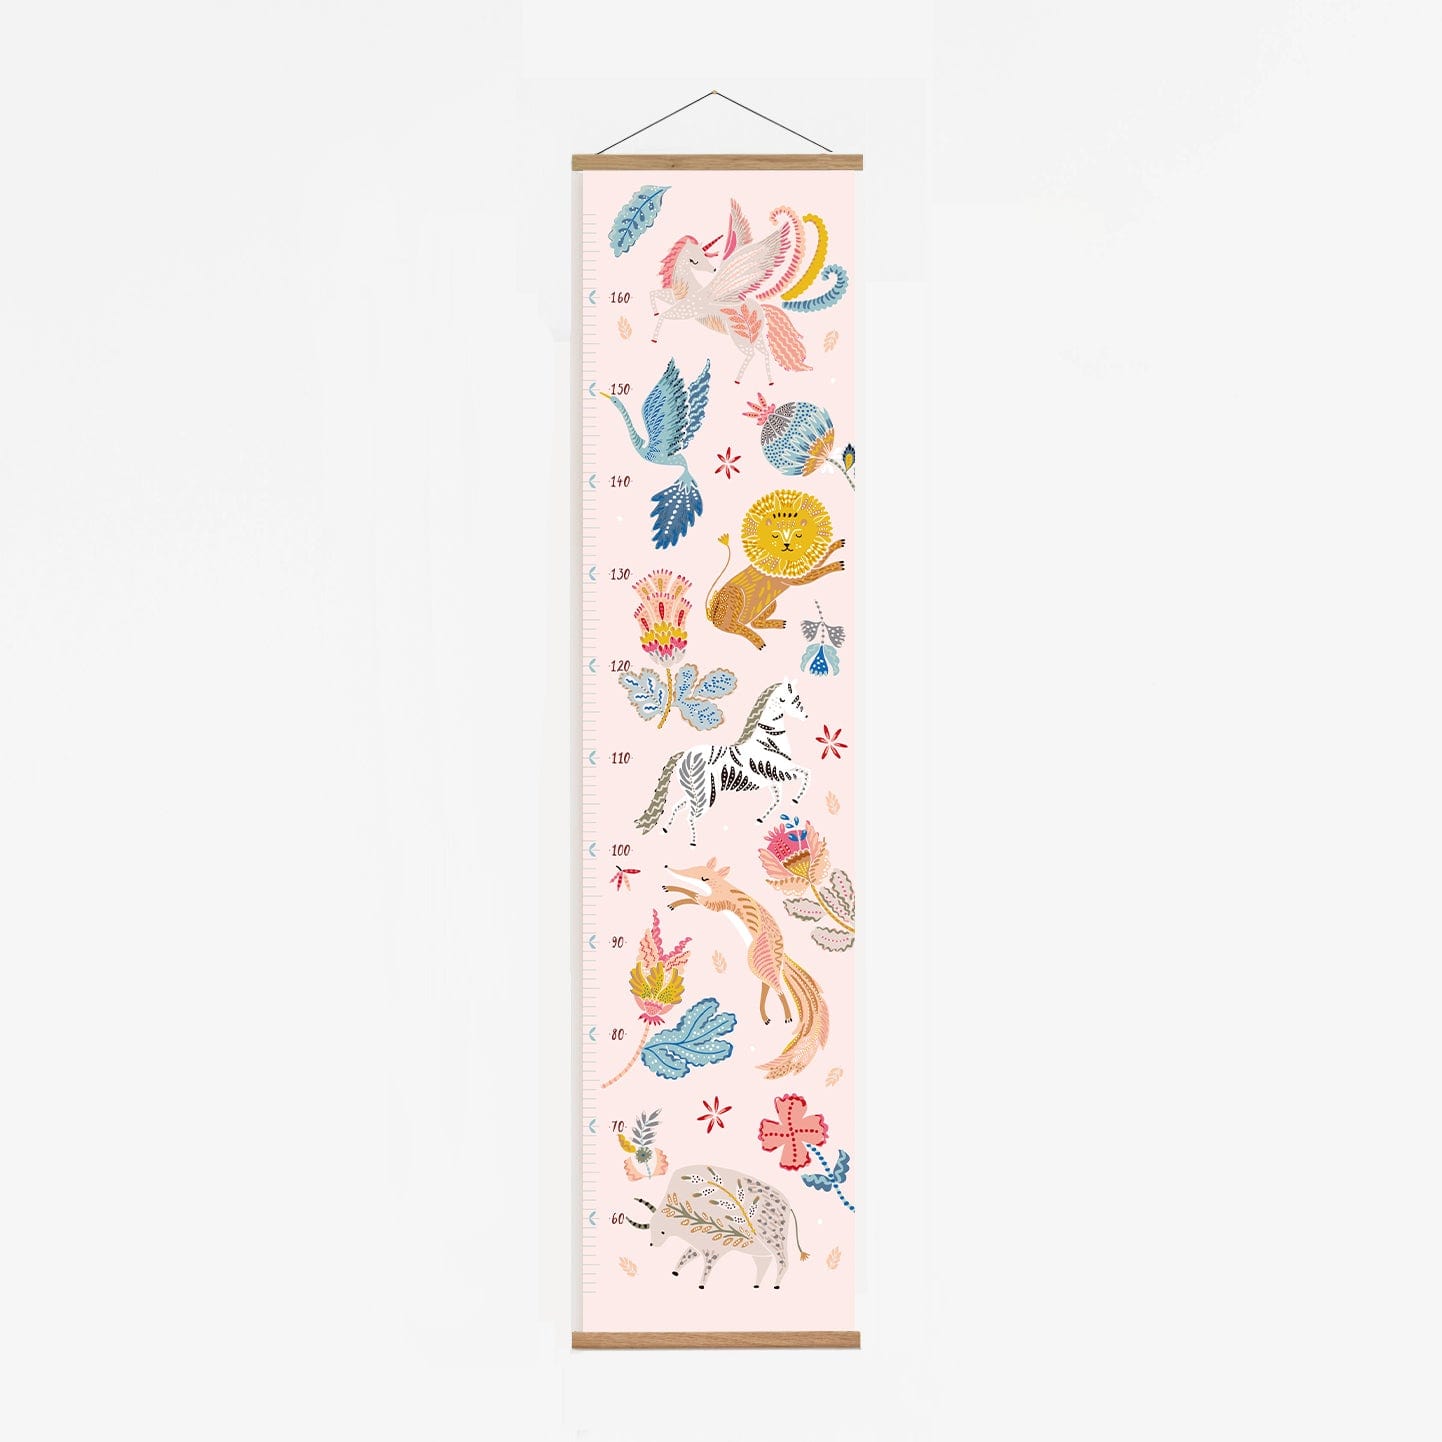 Hand-drawn design featuring line and dot detailed animals in carnival colours - featuring a fox, a lion,a nd unicorn and more, amongst bright florals